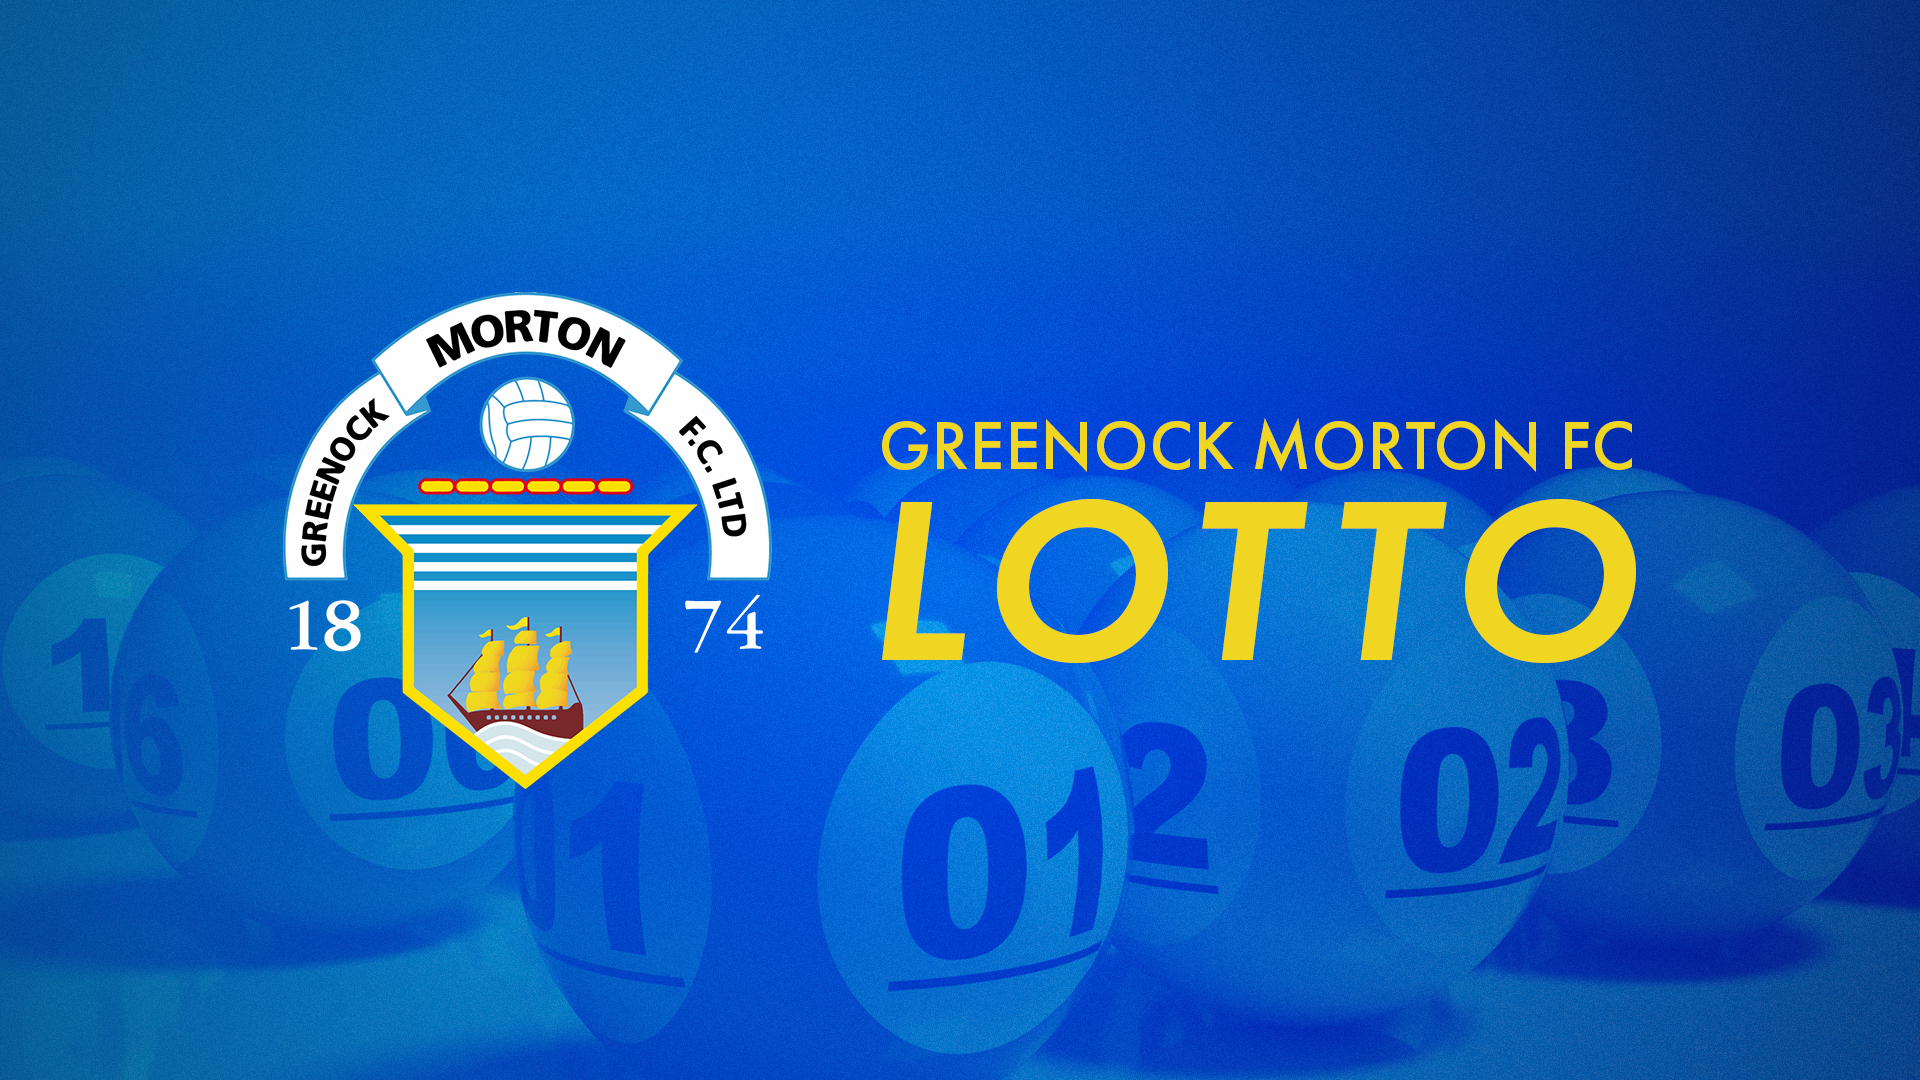 Morton lottery: Jackpot of over £20k up for grabs